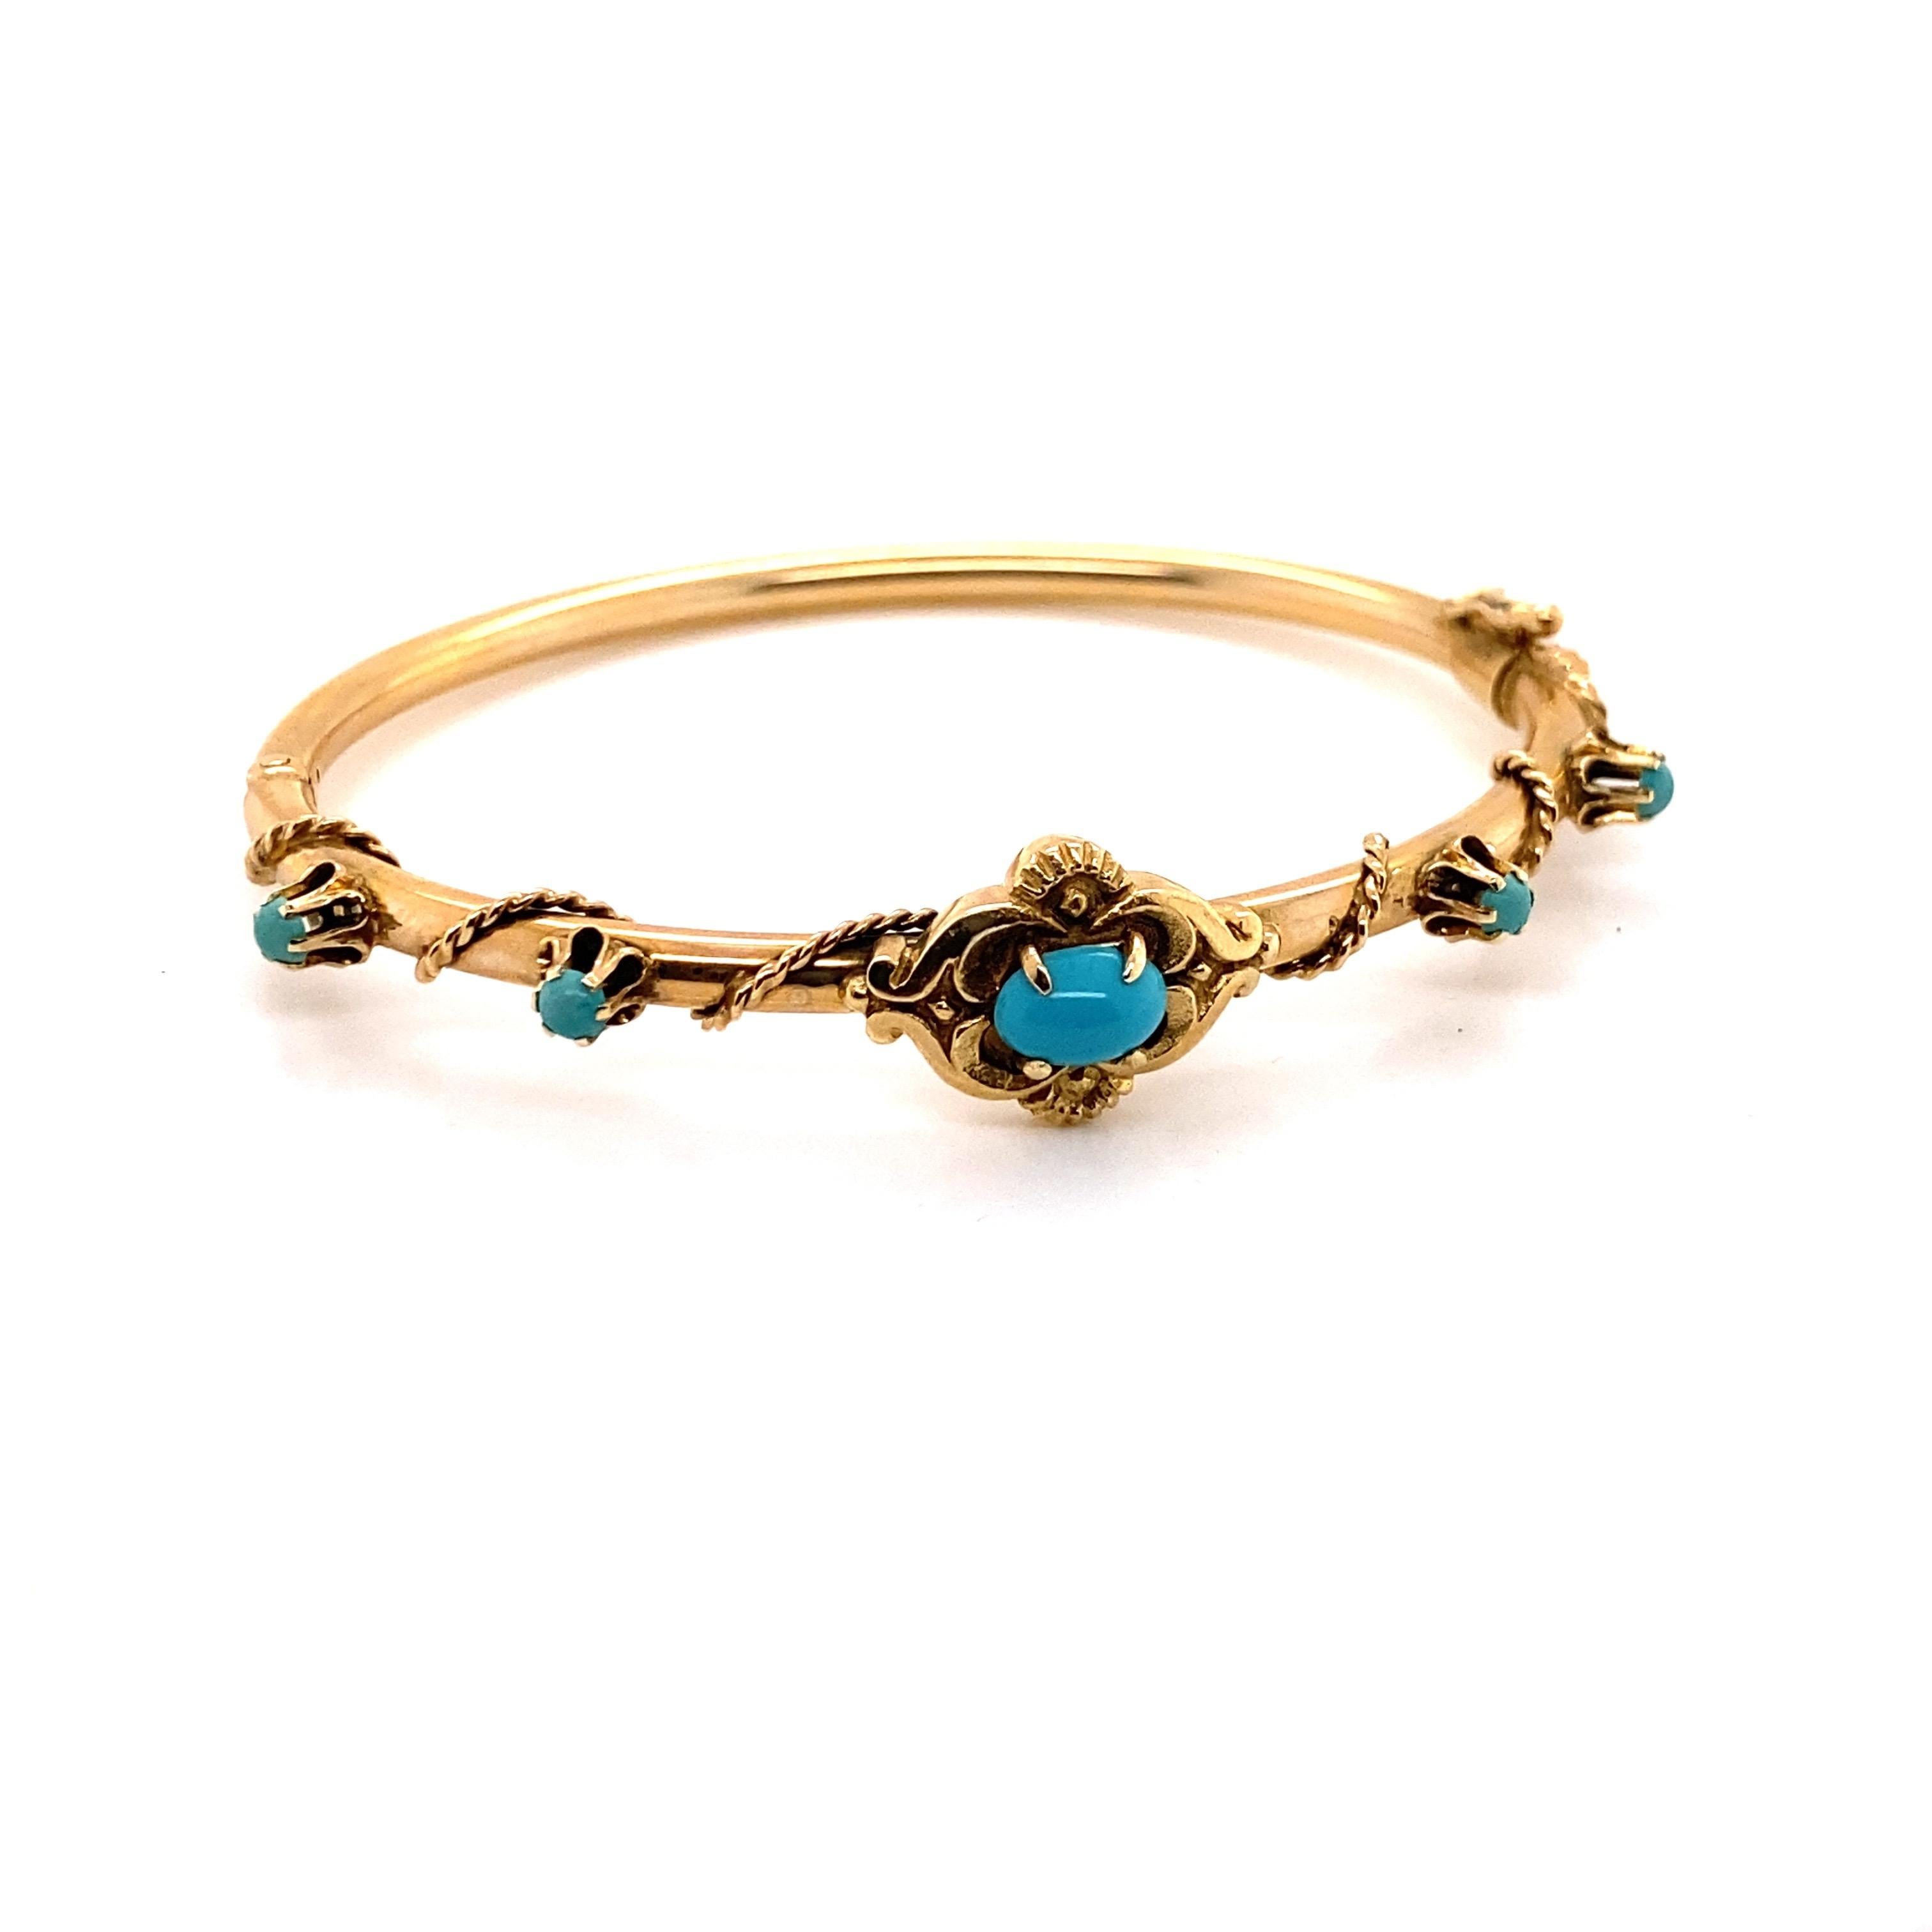 Women's 14K Yellow Gold Victorian Reproduction Bangle Bracelet with Turquoise For Sale